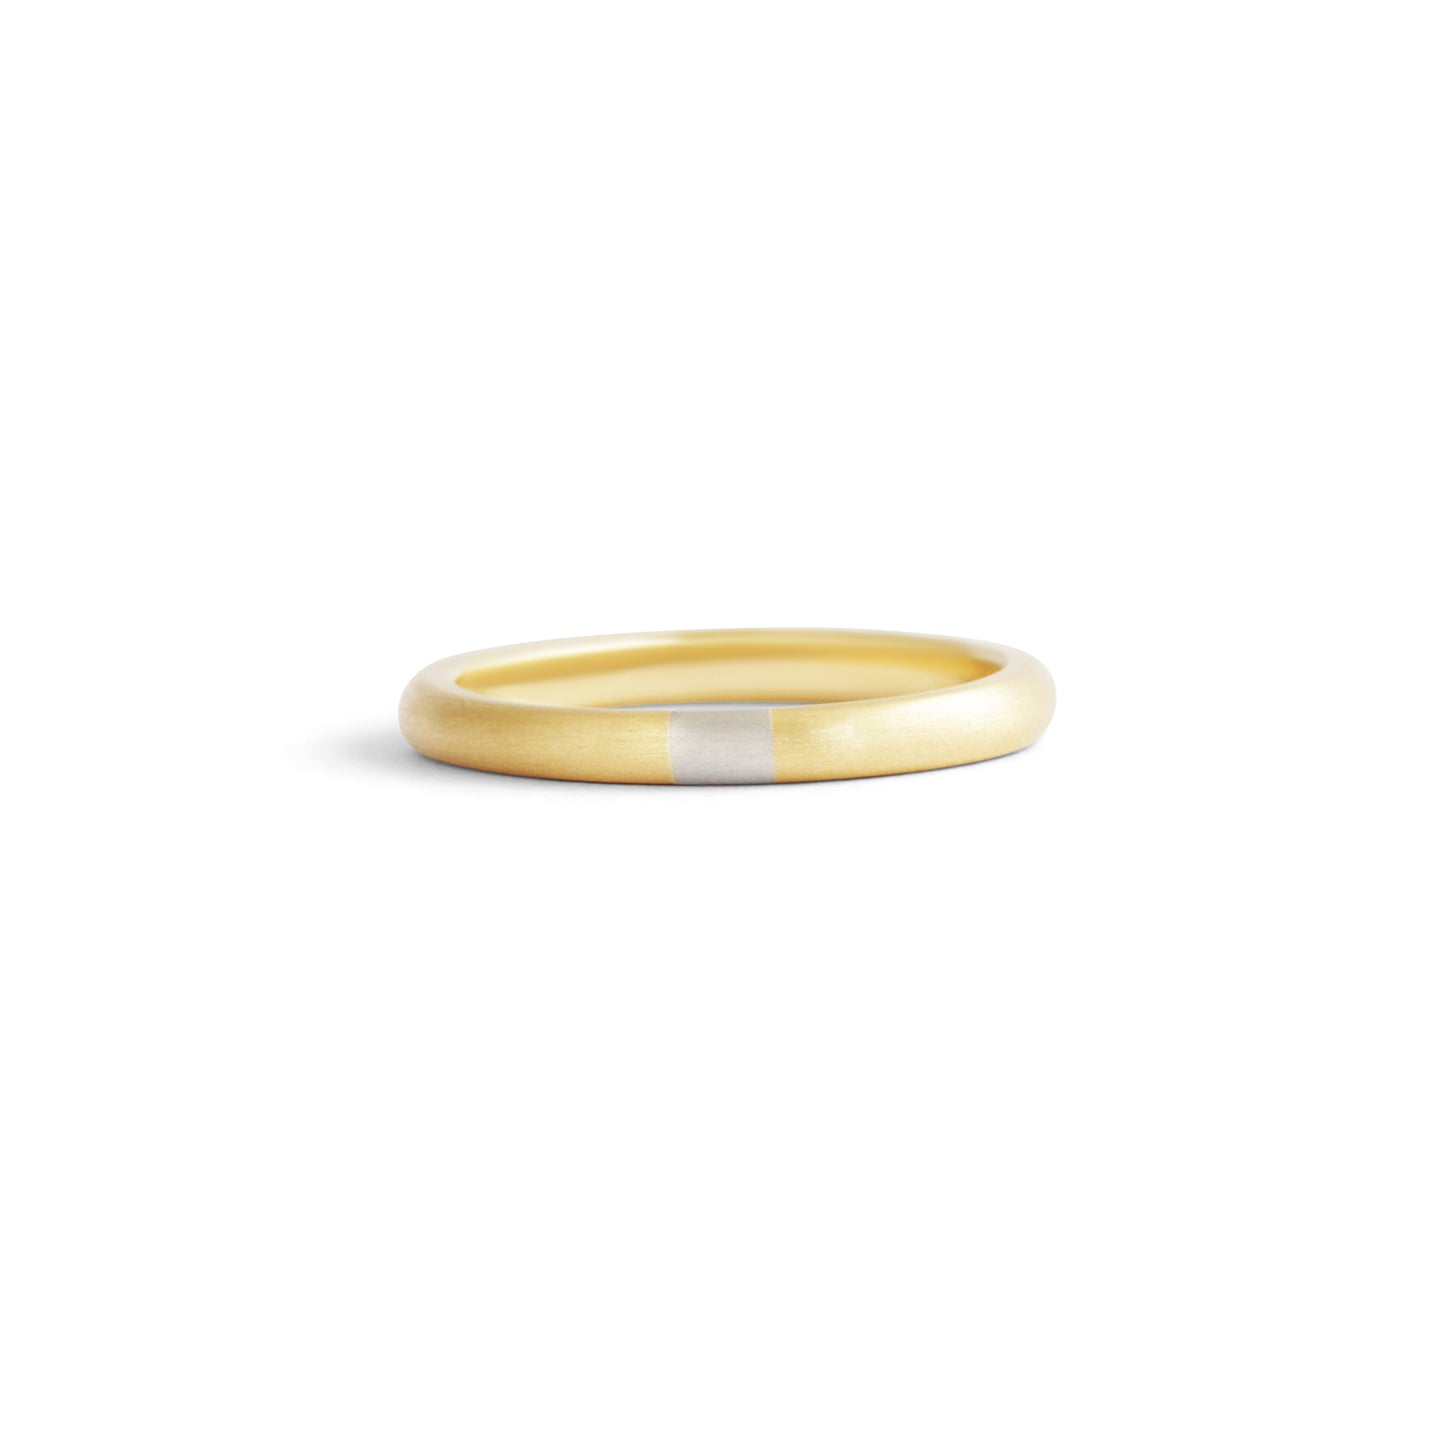 You & Me Band / Two Tone Large Dome - Goldpoint Studio - Greenpoint, Brooklyn - Fine Jewelry